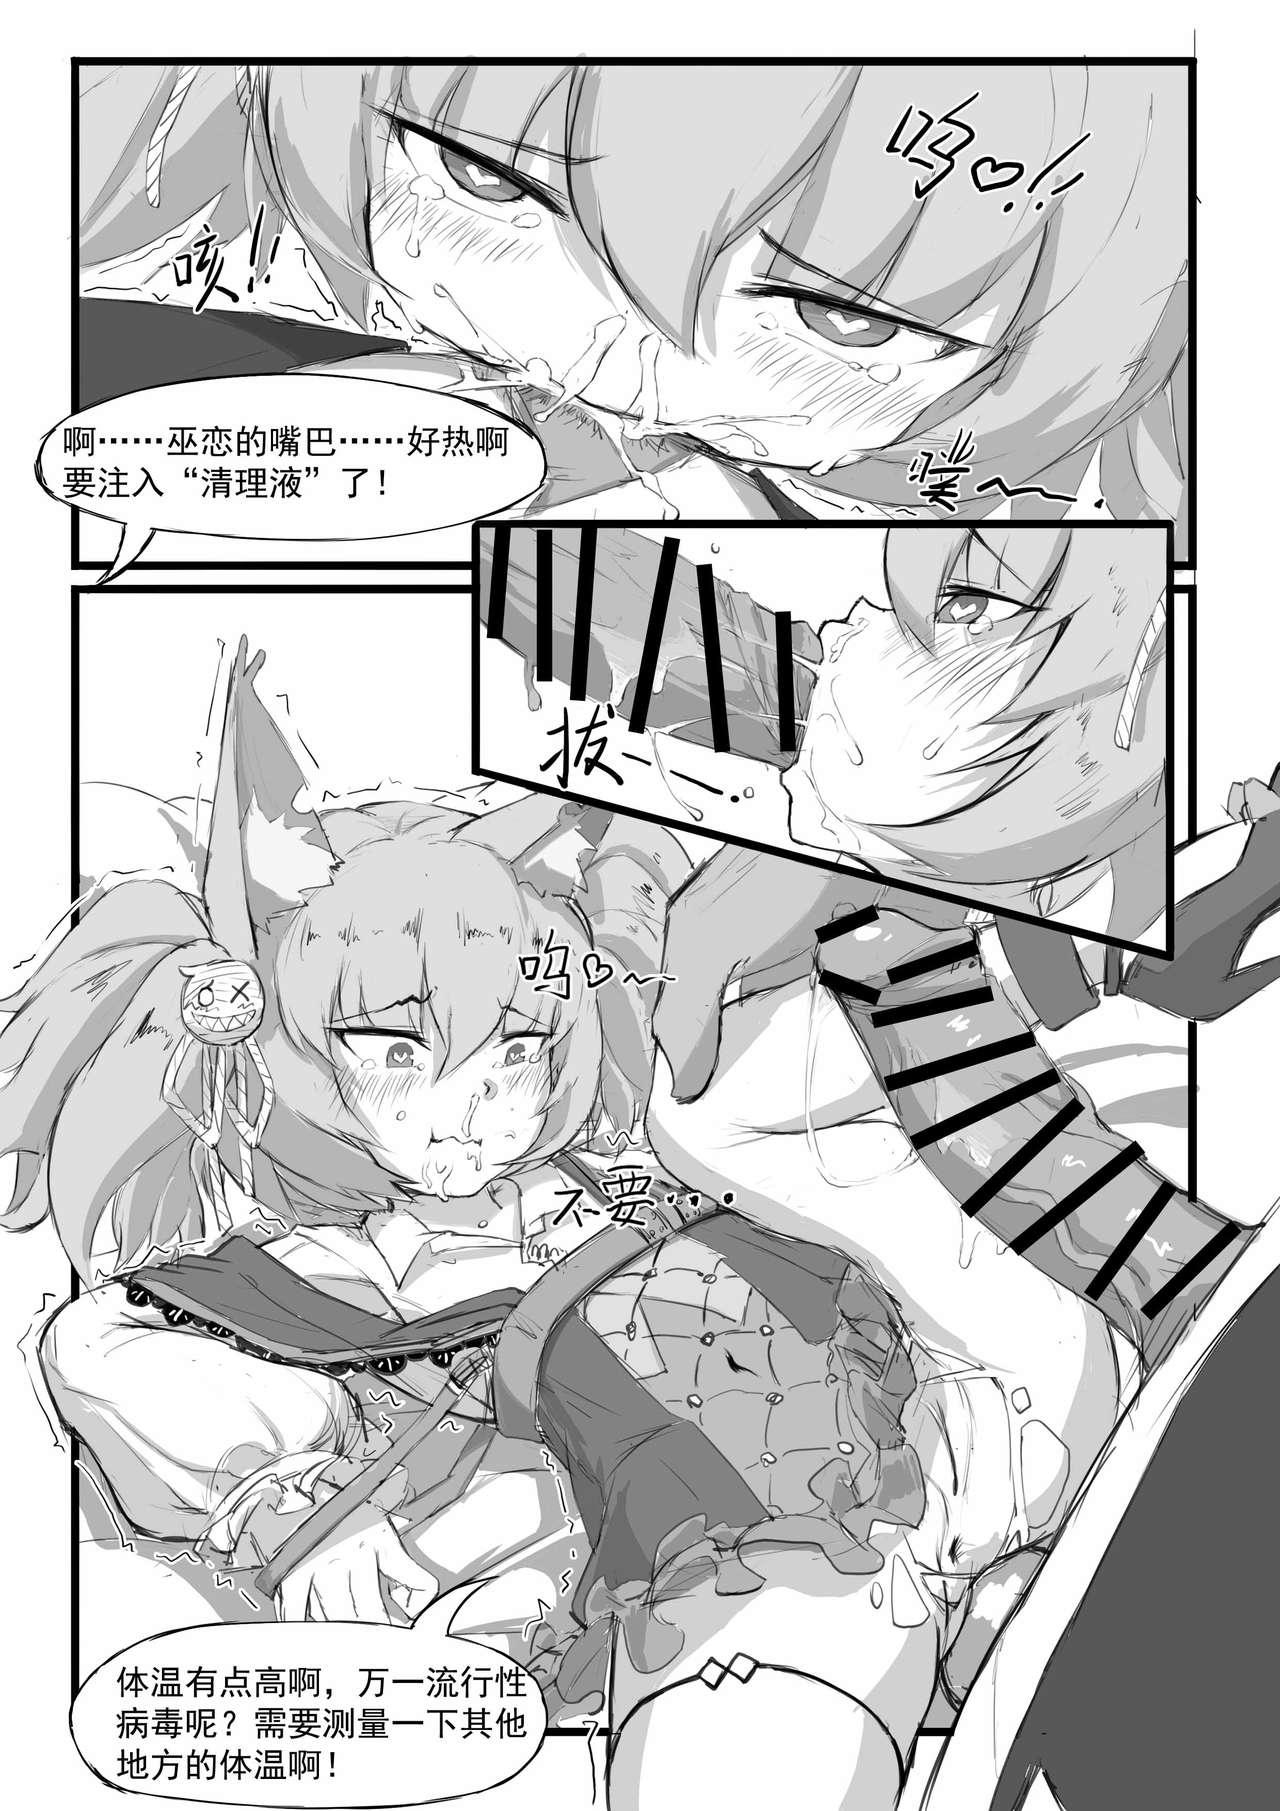 Blond 巫恋的入职体检 - Arknights Straight - Page 5